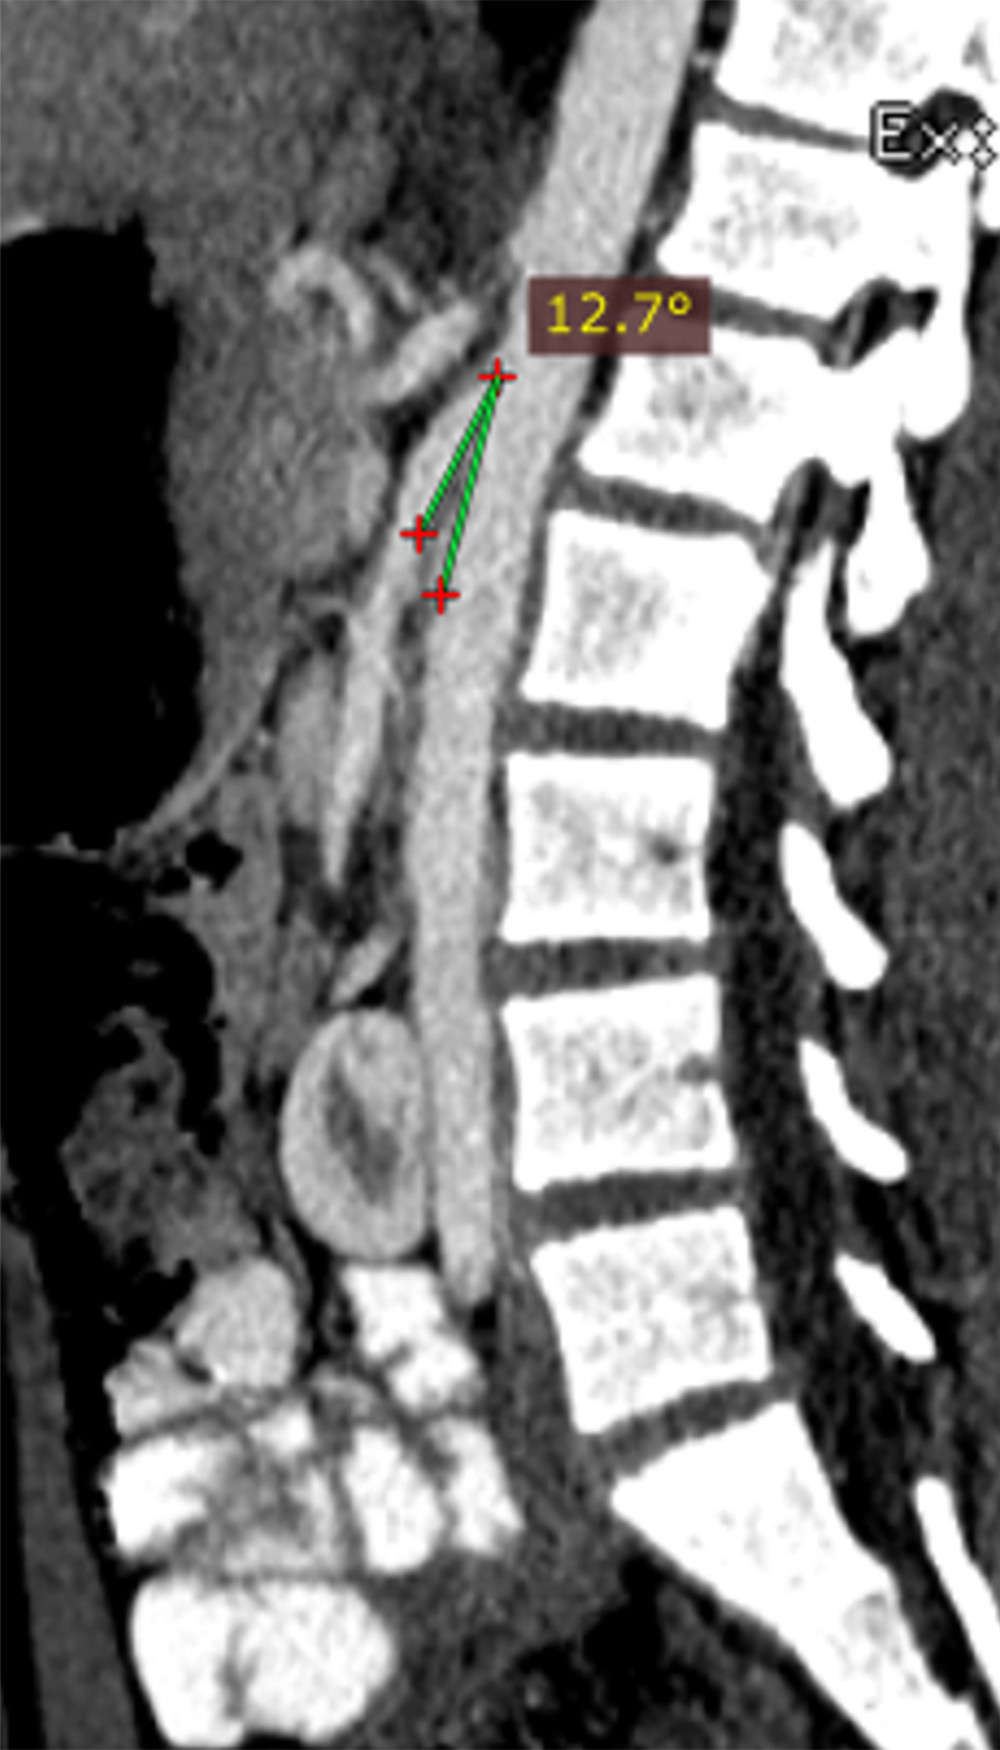 Sagittal computed tomography angiography showing the acute takeoff of the superior mesenteric artery from the aorta at an angle of 12.7 degrees.